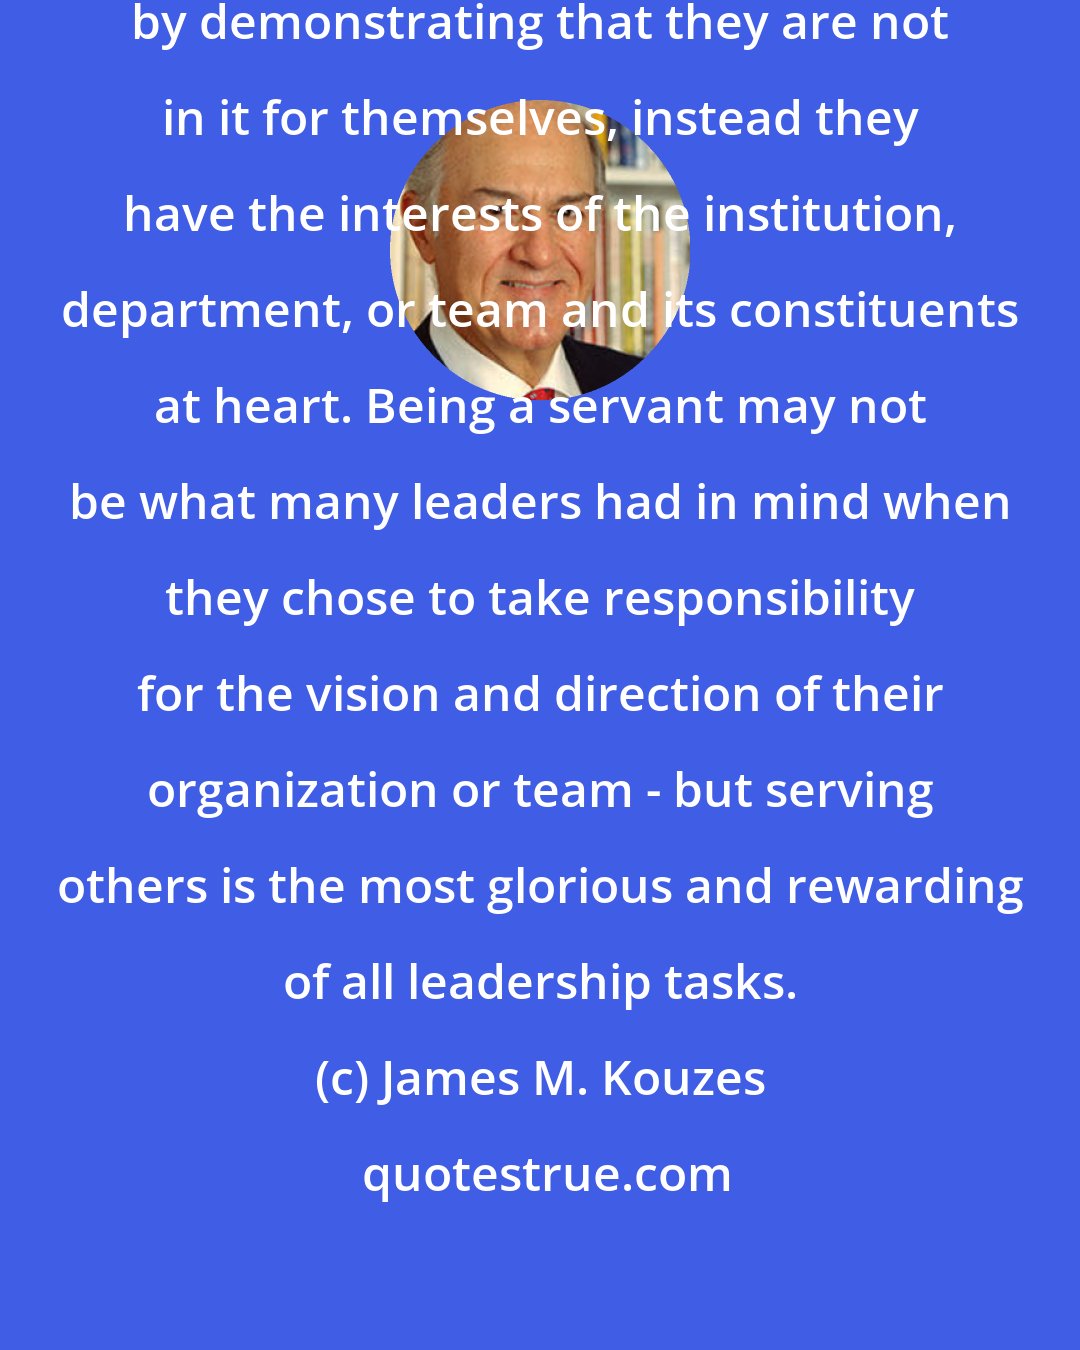 James M. Kouzes: Leaders strengthen credibility by demonstrating that they are not in it for themselves, instead they have the interests of the institution, department, or team and its constituents at heart. Being a servant may not be what many leaders had in mind when they chose to take responsibility for the vision and direction of their organization or team - but serving others is the most glorious and rewarding of all leadership tasks.